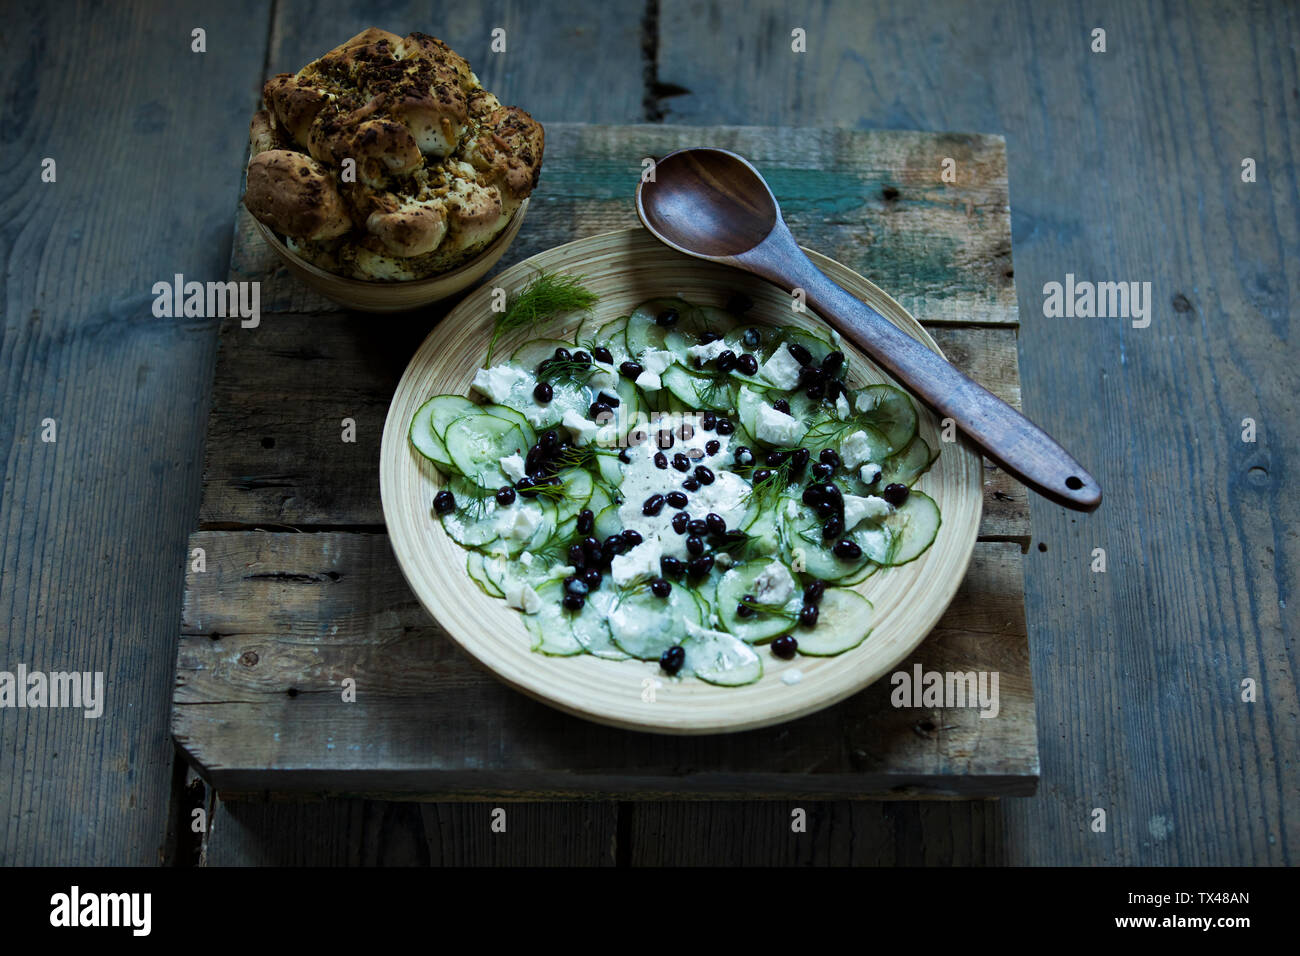 ucumber salad with black beans, sheep cheese, dill and pickled bread Stock Photo